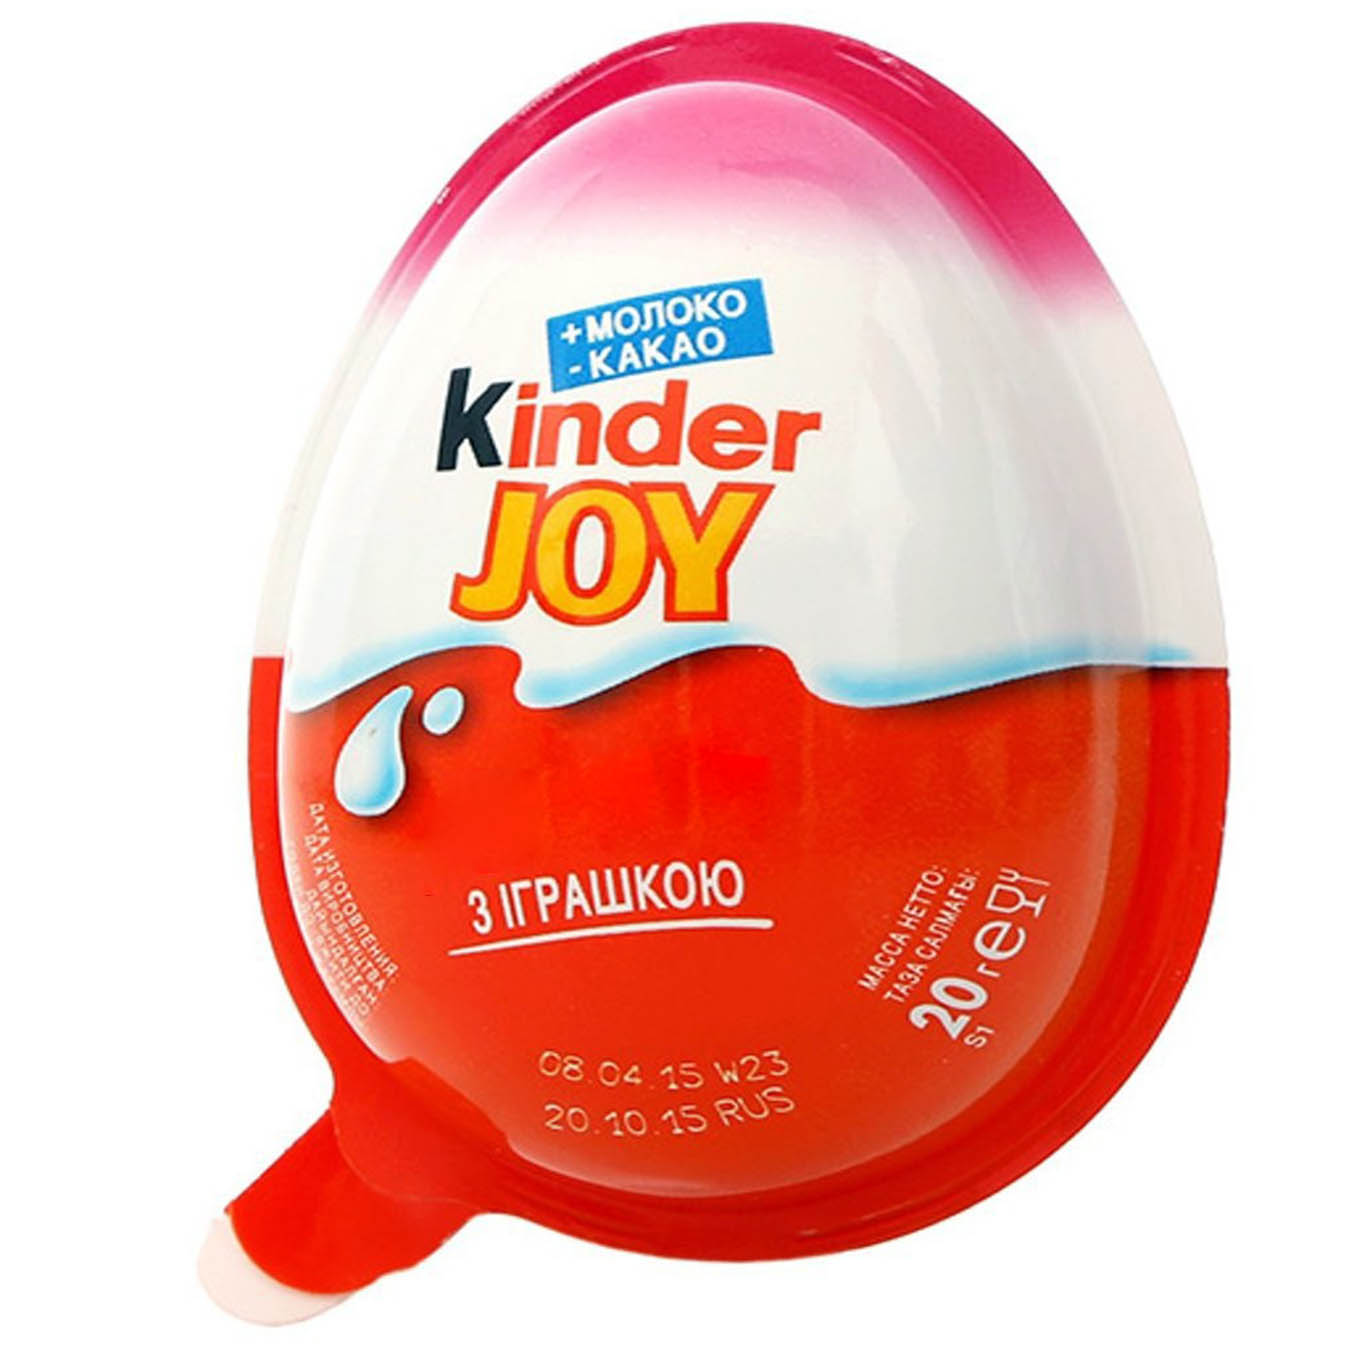 Kinder Joy Egg in assortment For girls with toy 20g